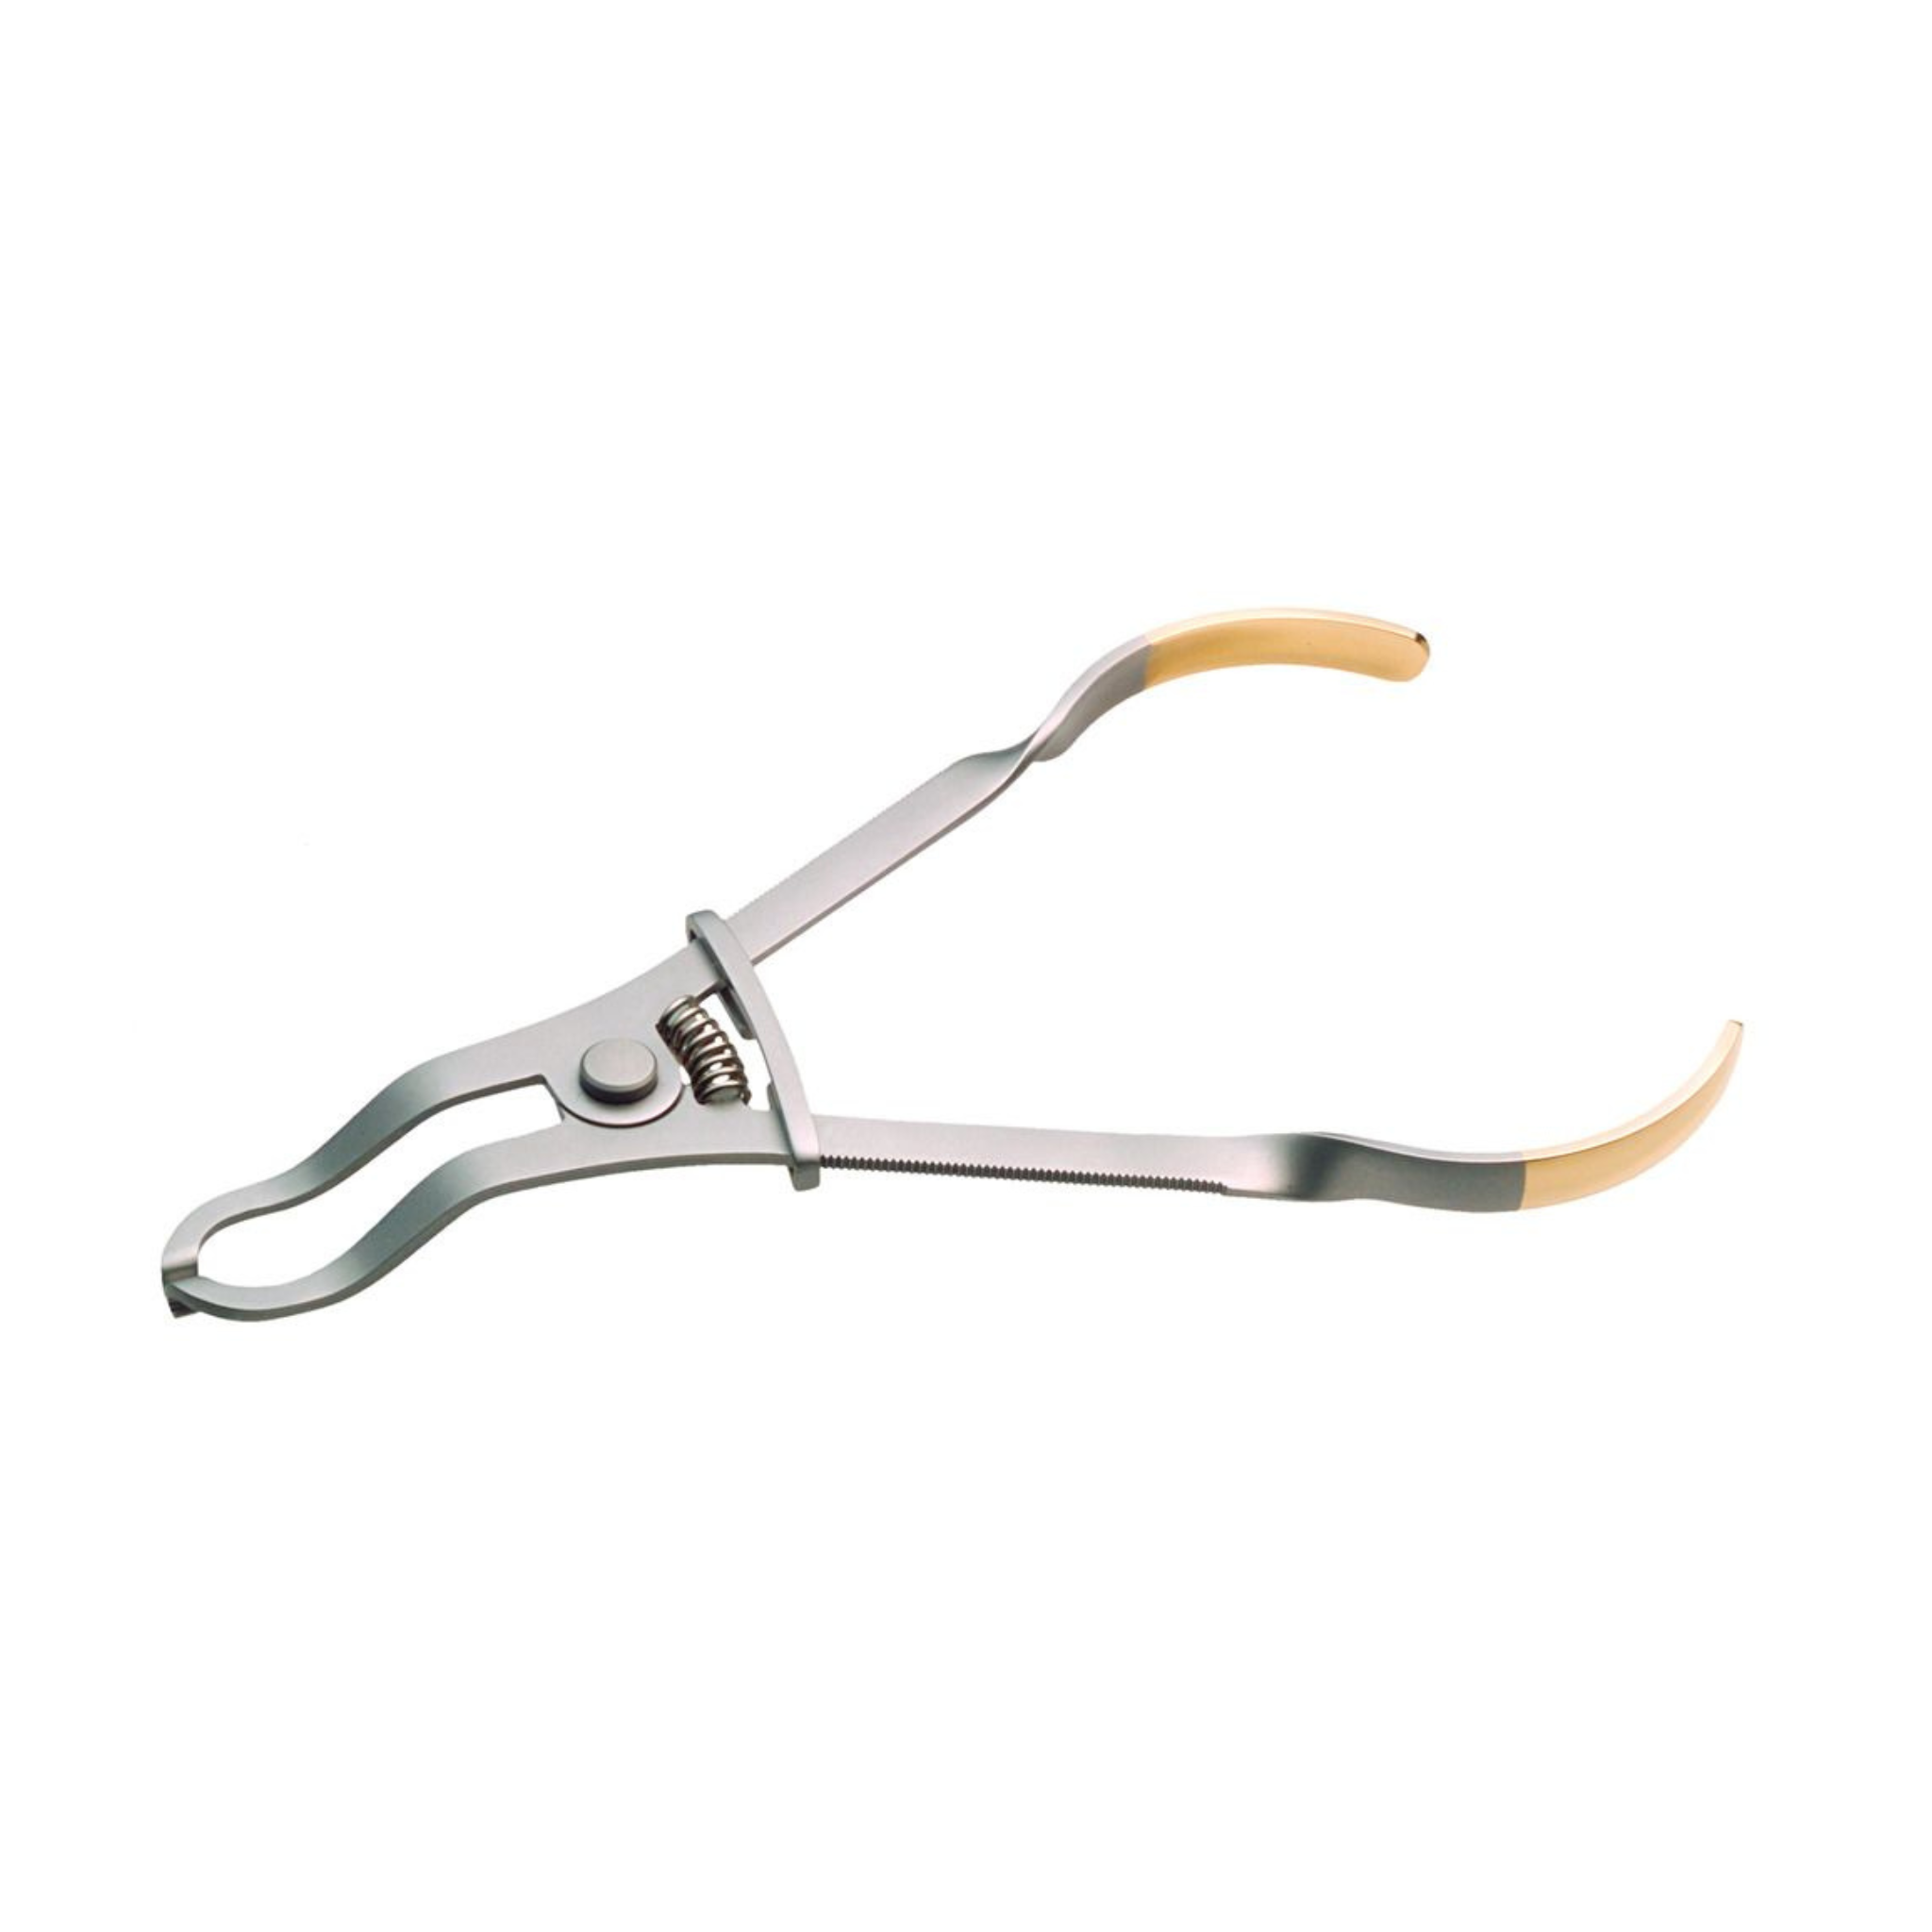 Application pliers for Garrison rings